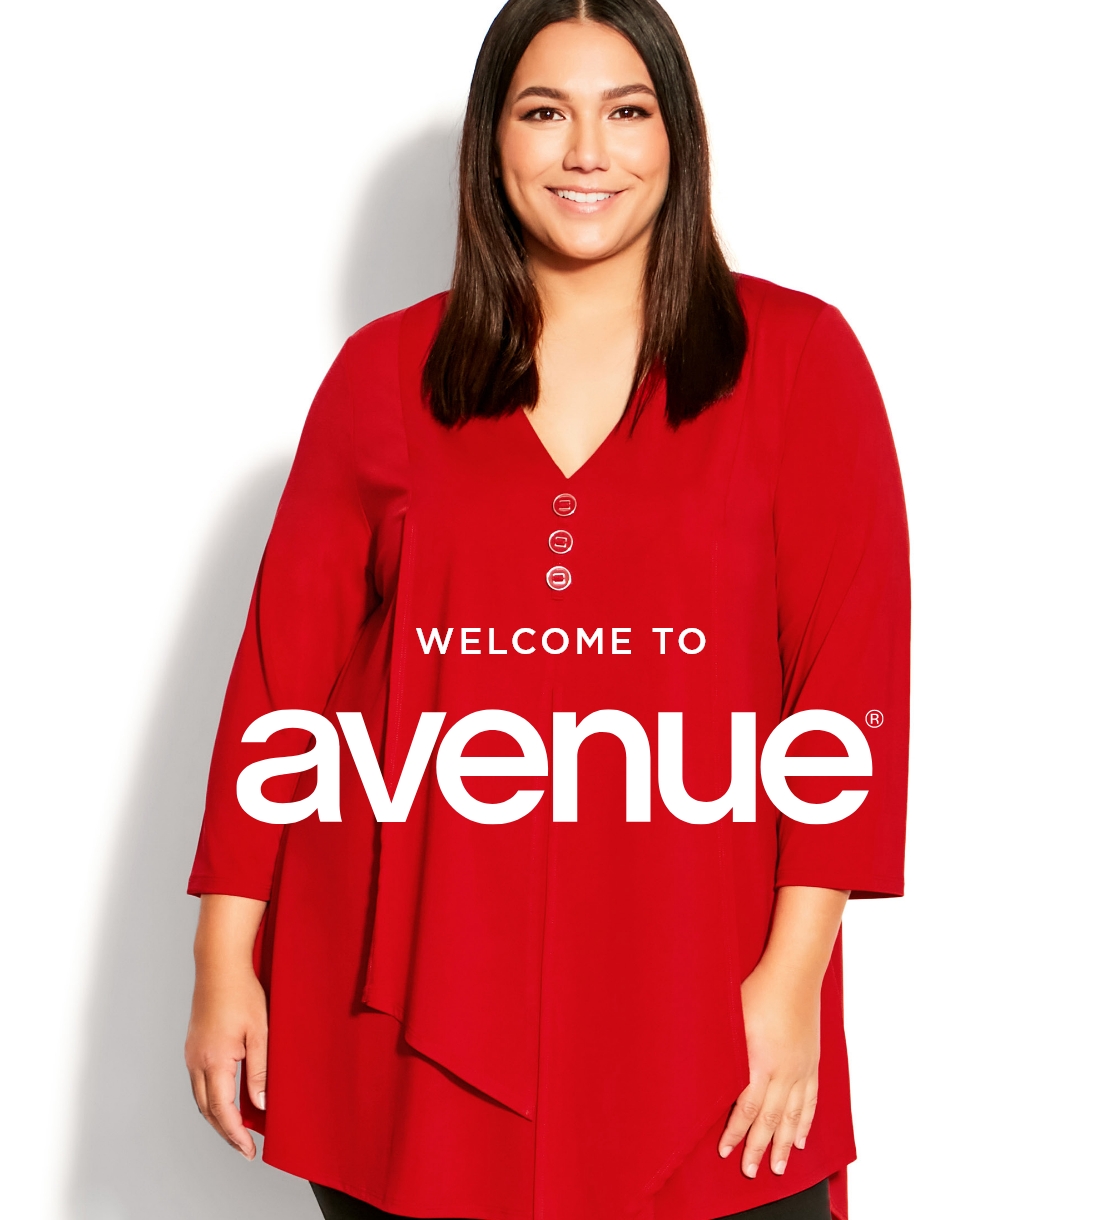 Welcome to Avenue